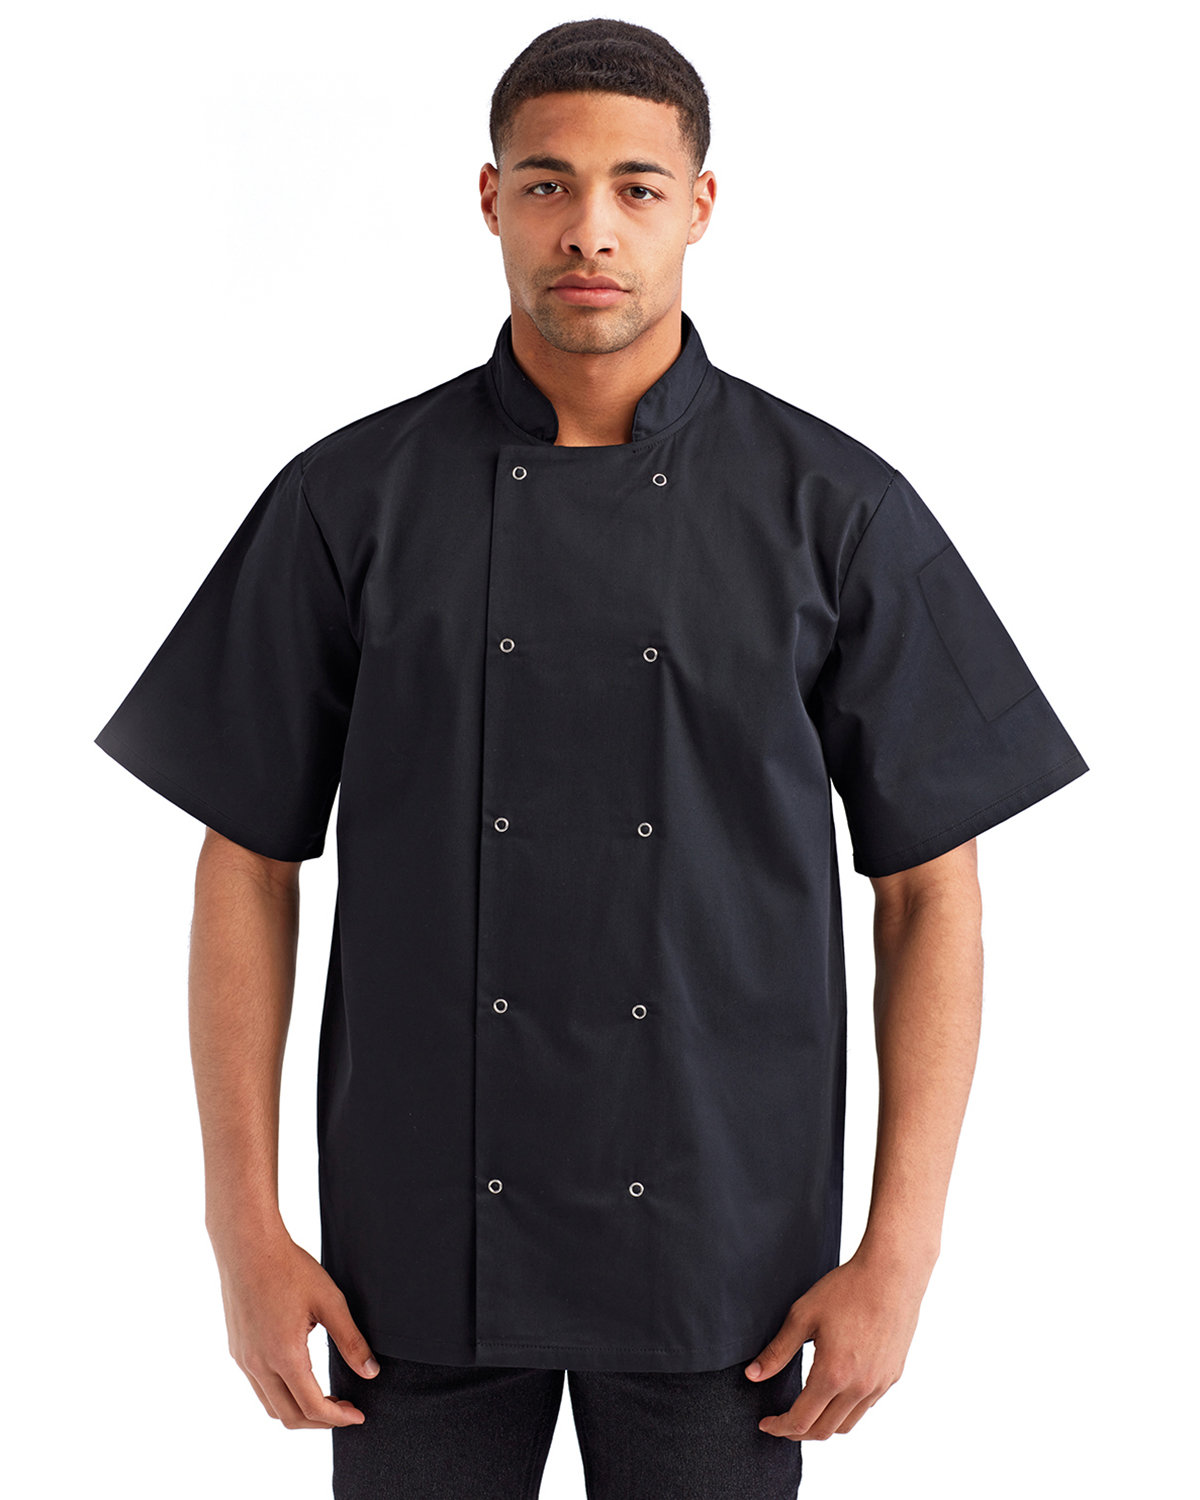 Picture of Artisan Collection by Reprime Unisex Studded Front Short-Sleeve Chef's Jacket